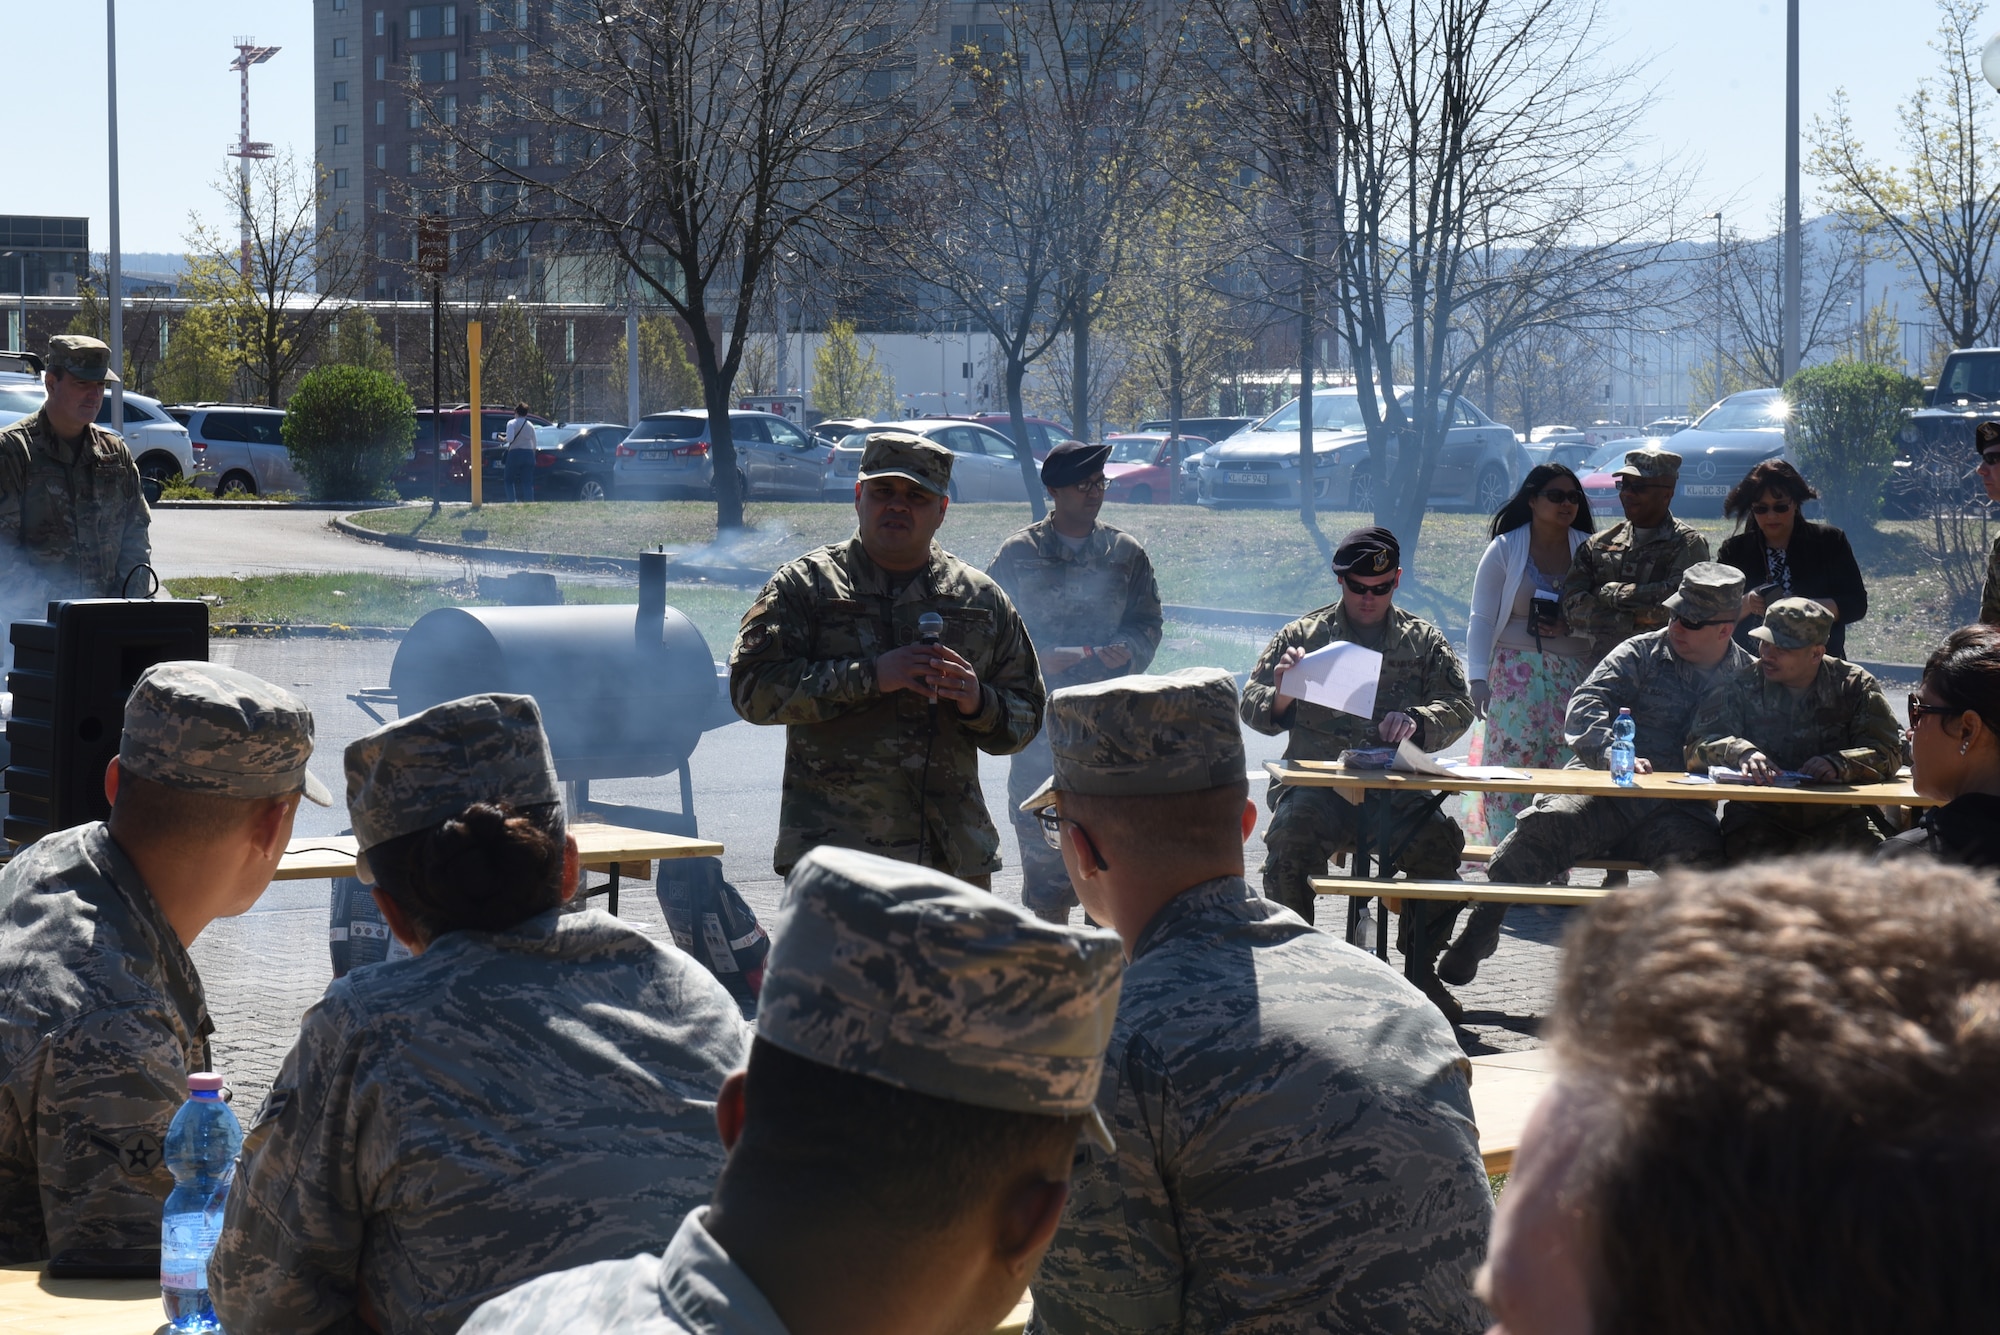 U.S. Air Force Chief Master Sgt. Ernesto Rendon, 86th Airlift Wing command chief, speaks to members of the Kaiserslautern Military Community about the Air Force Assistance Fund April 18, 2019 on Ramstein Air Base, Germany. The AFAF campaign provides us the opportunity to donate to four distinct charities; the Air Force Aid Society, the General and Mrs. Curtis E. Lemay Foundation, the Air Force Village, and the Air Force Enlisted Village. (U.S. Air Force photo by Airman 1st Class Kaylea Berry)